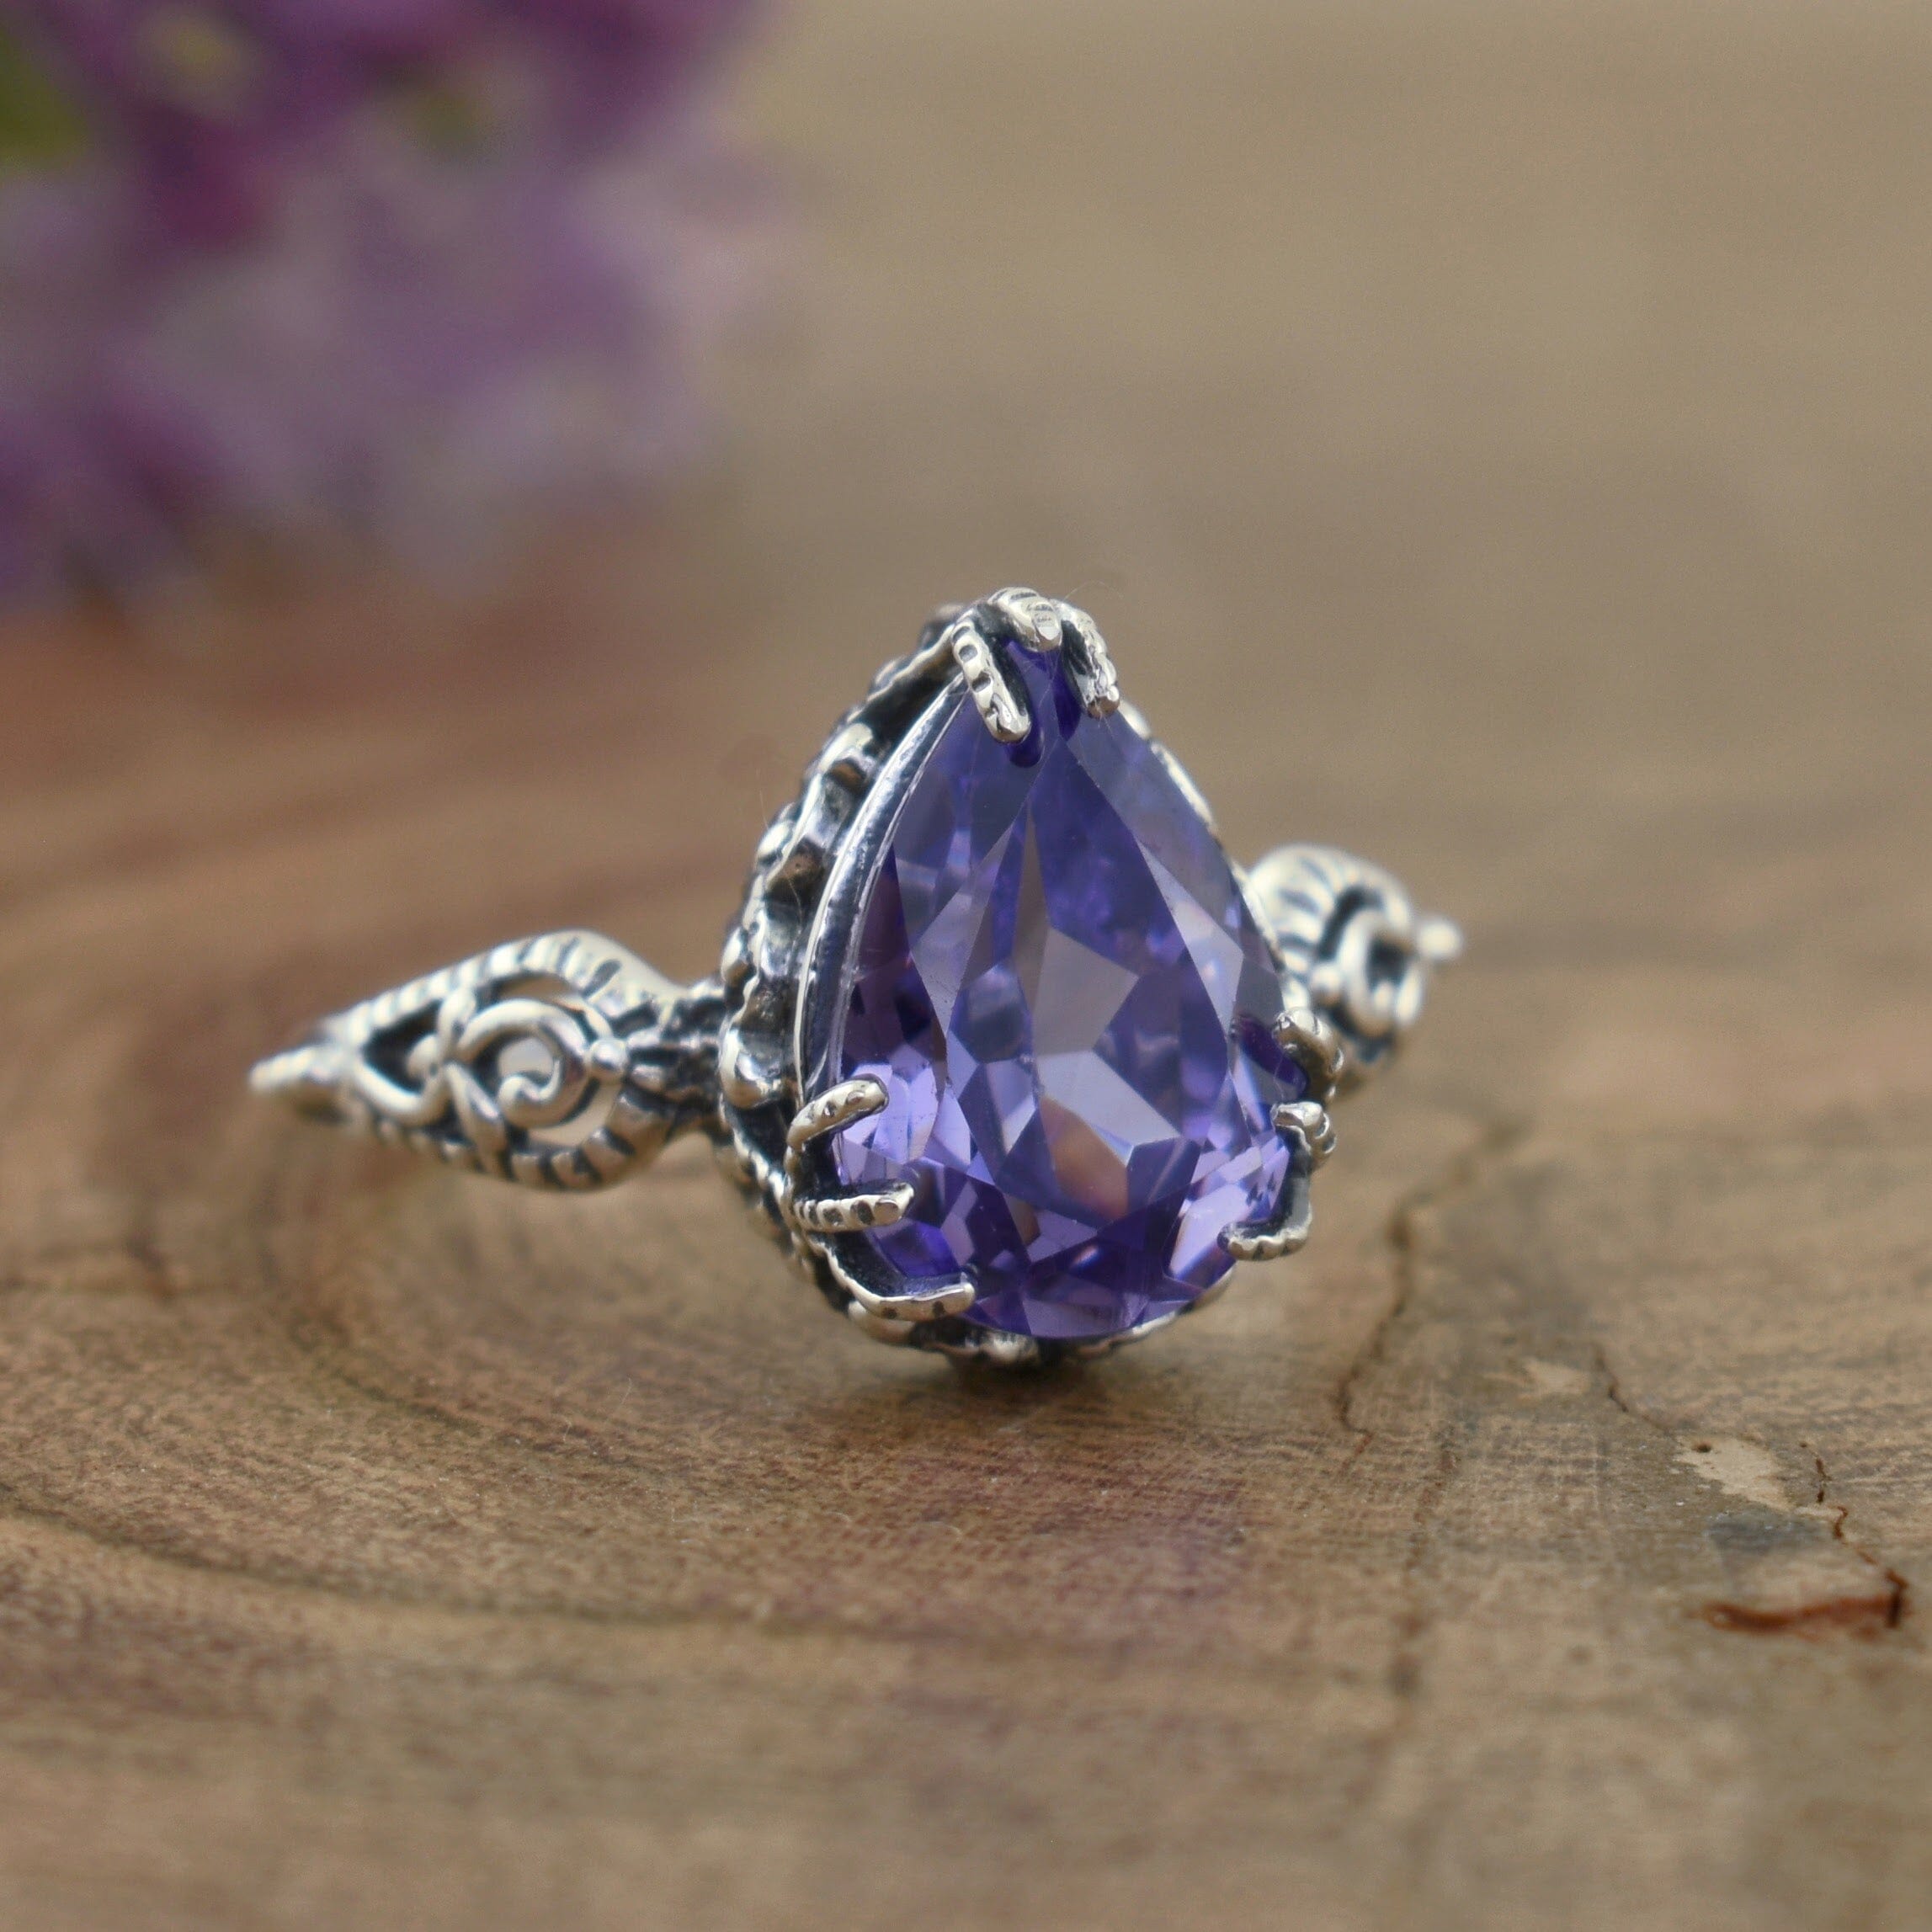 Pear-shaped purple stone ring set in .925 sterling silver